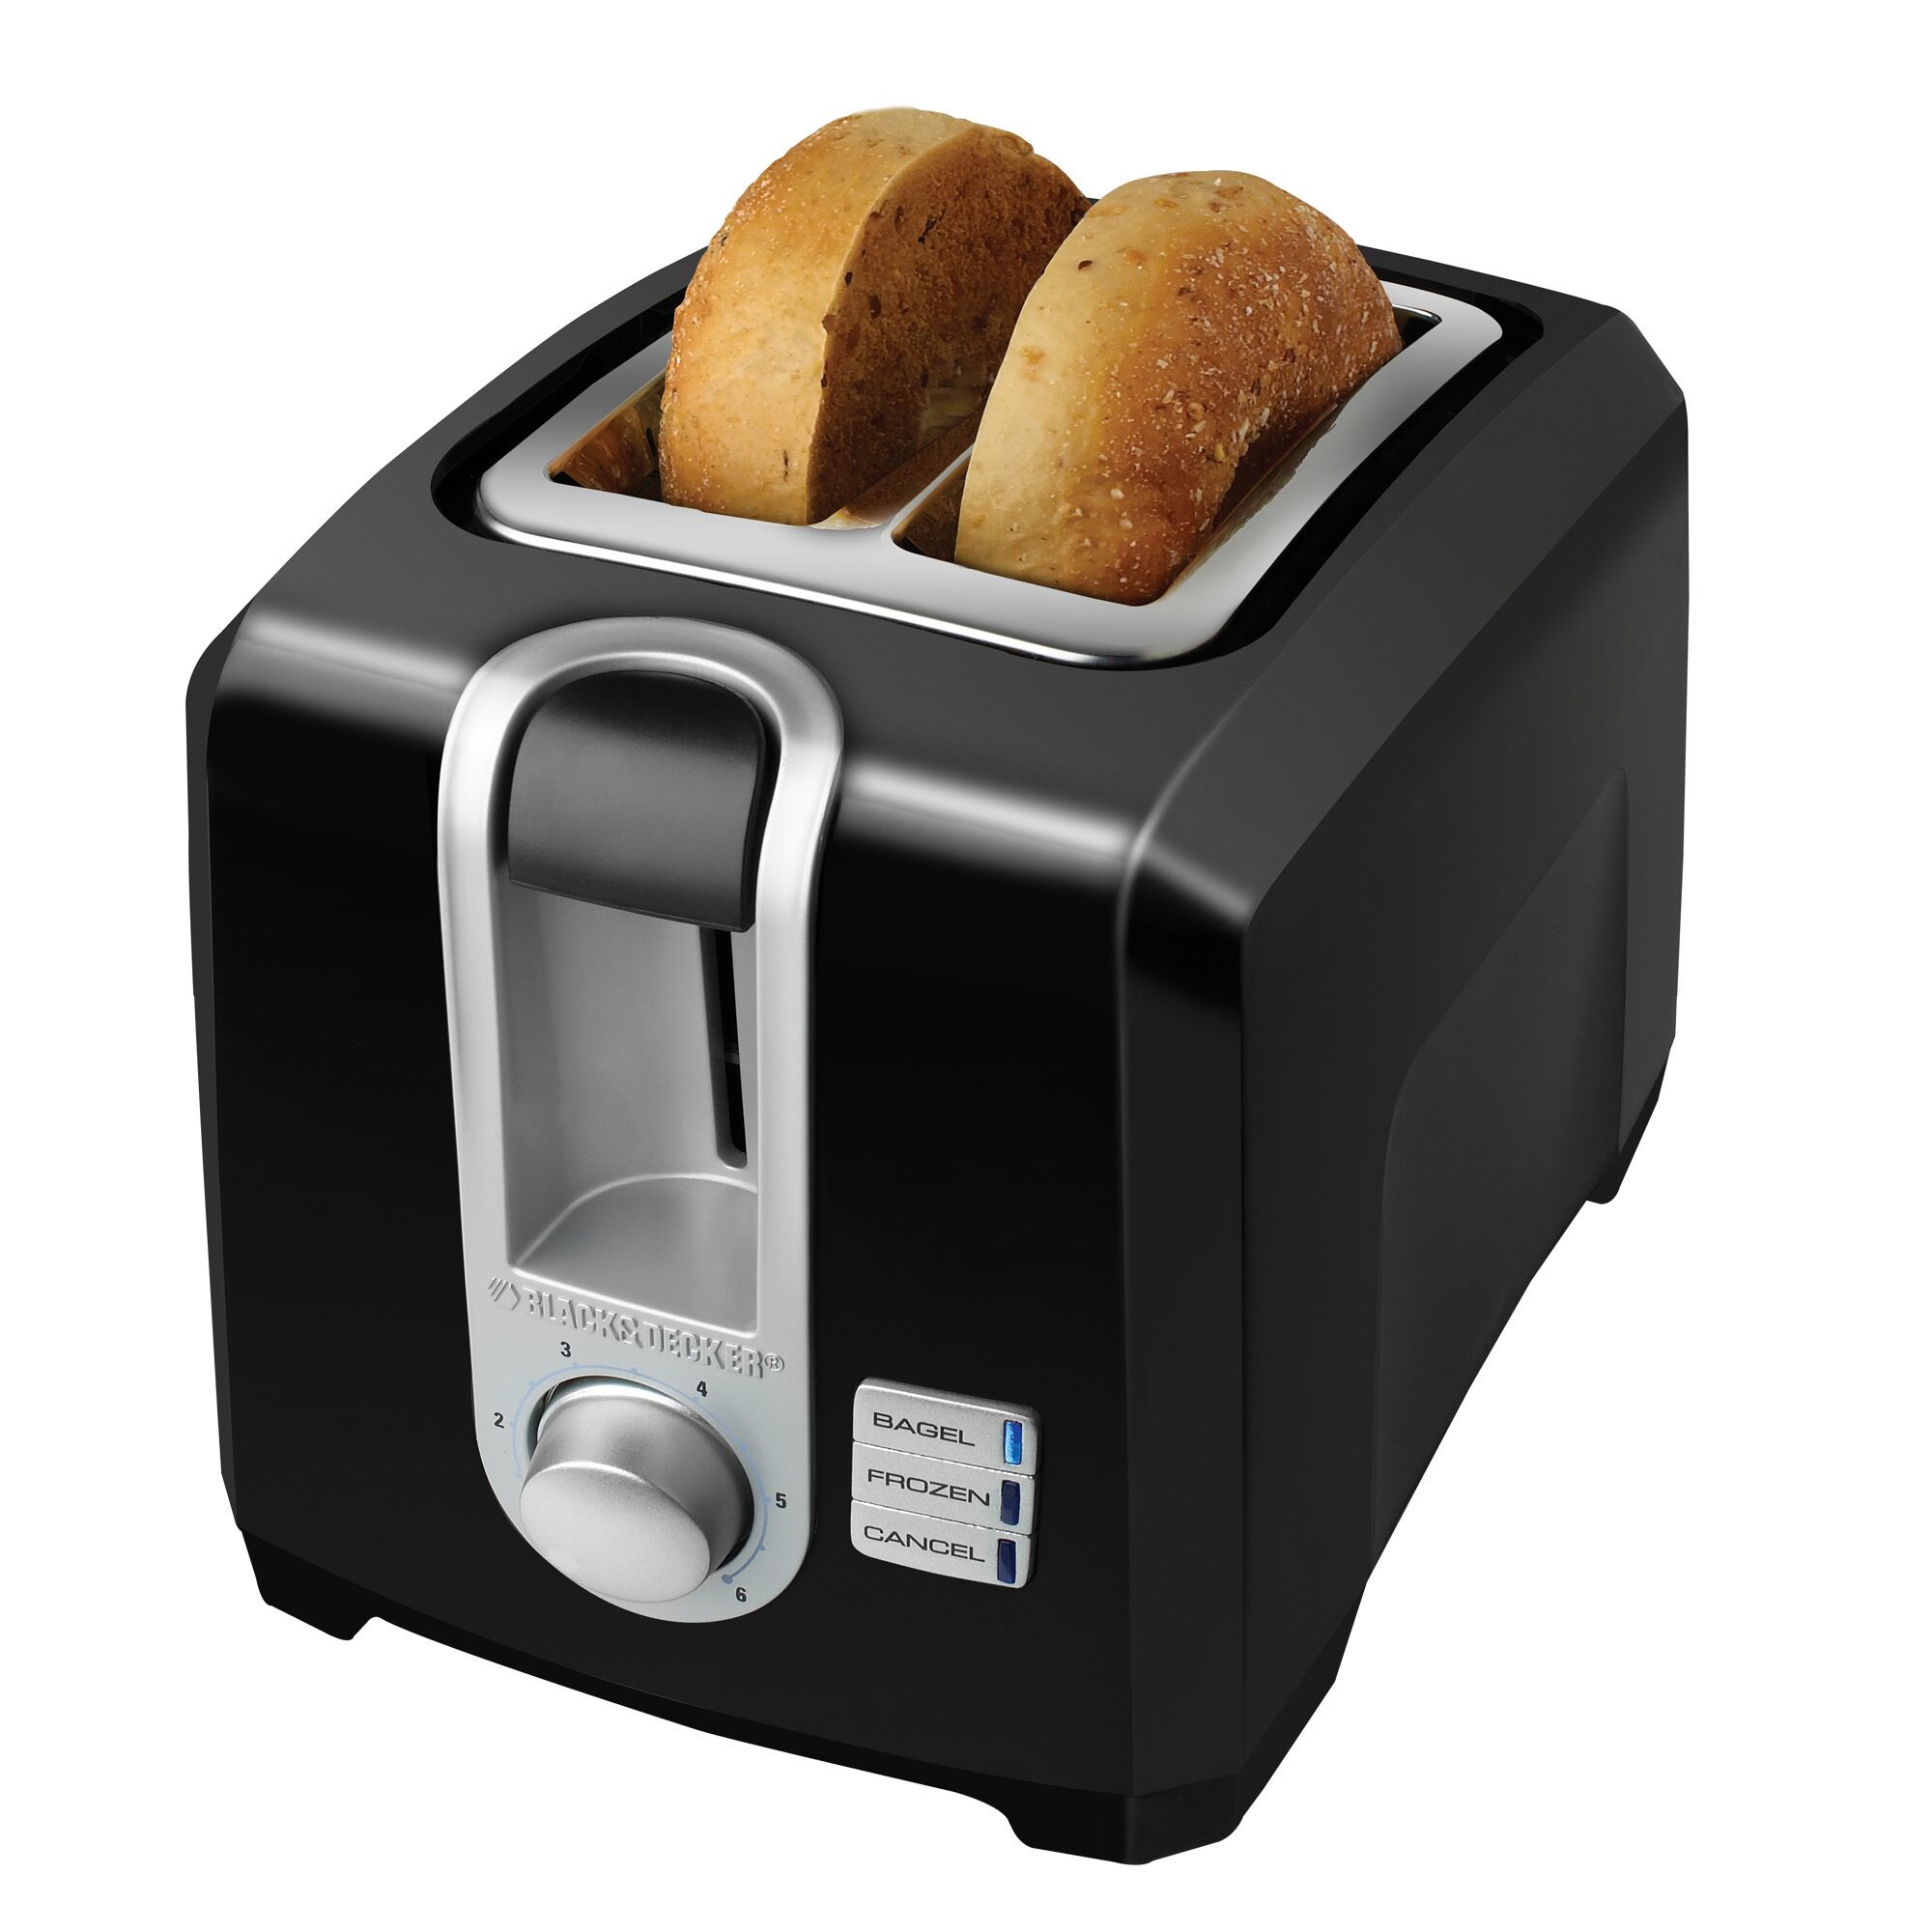 2 slice toaster with bagel.